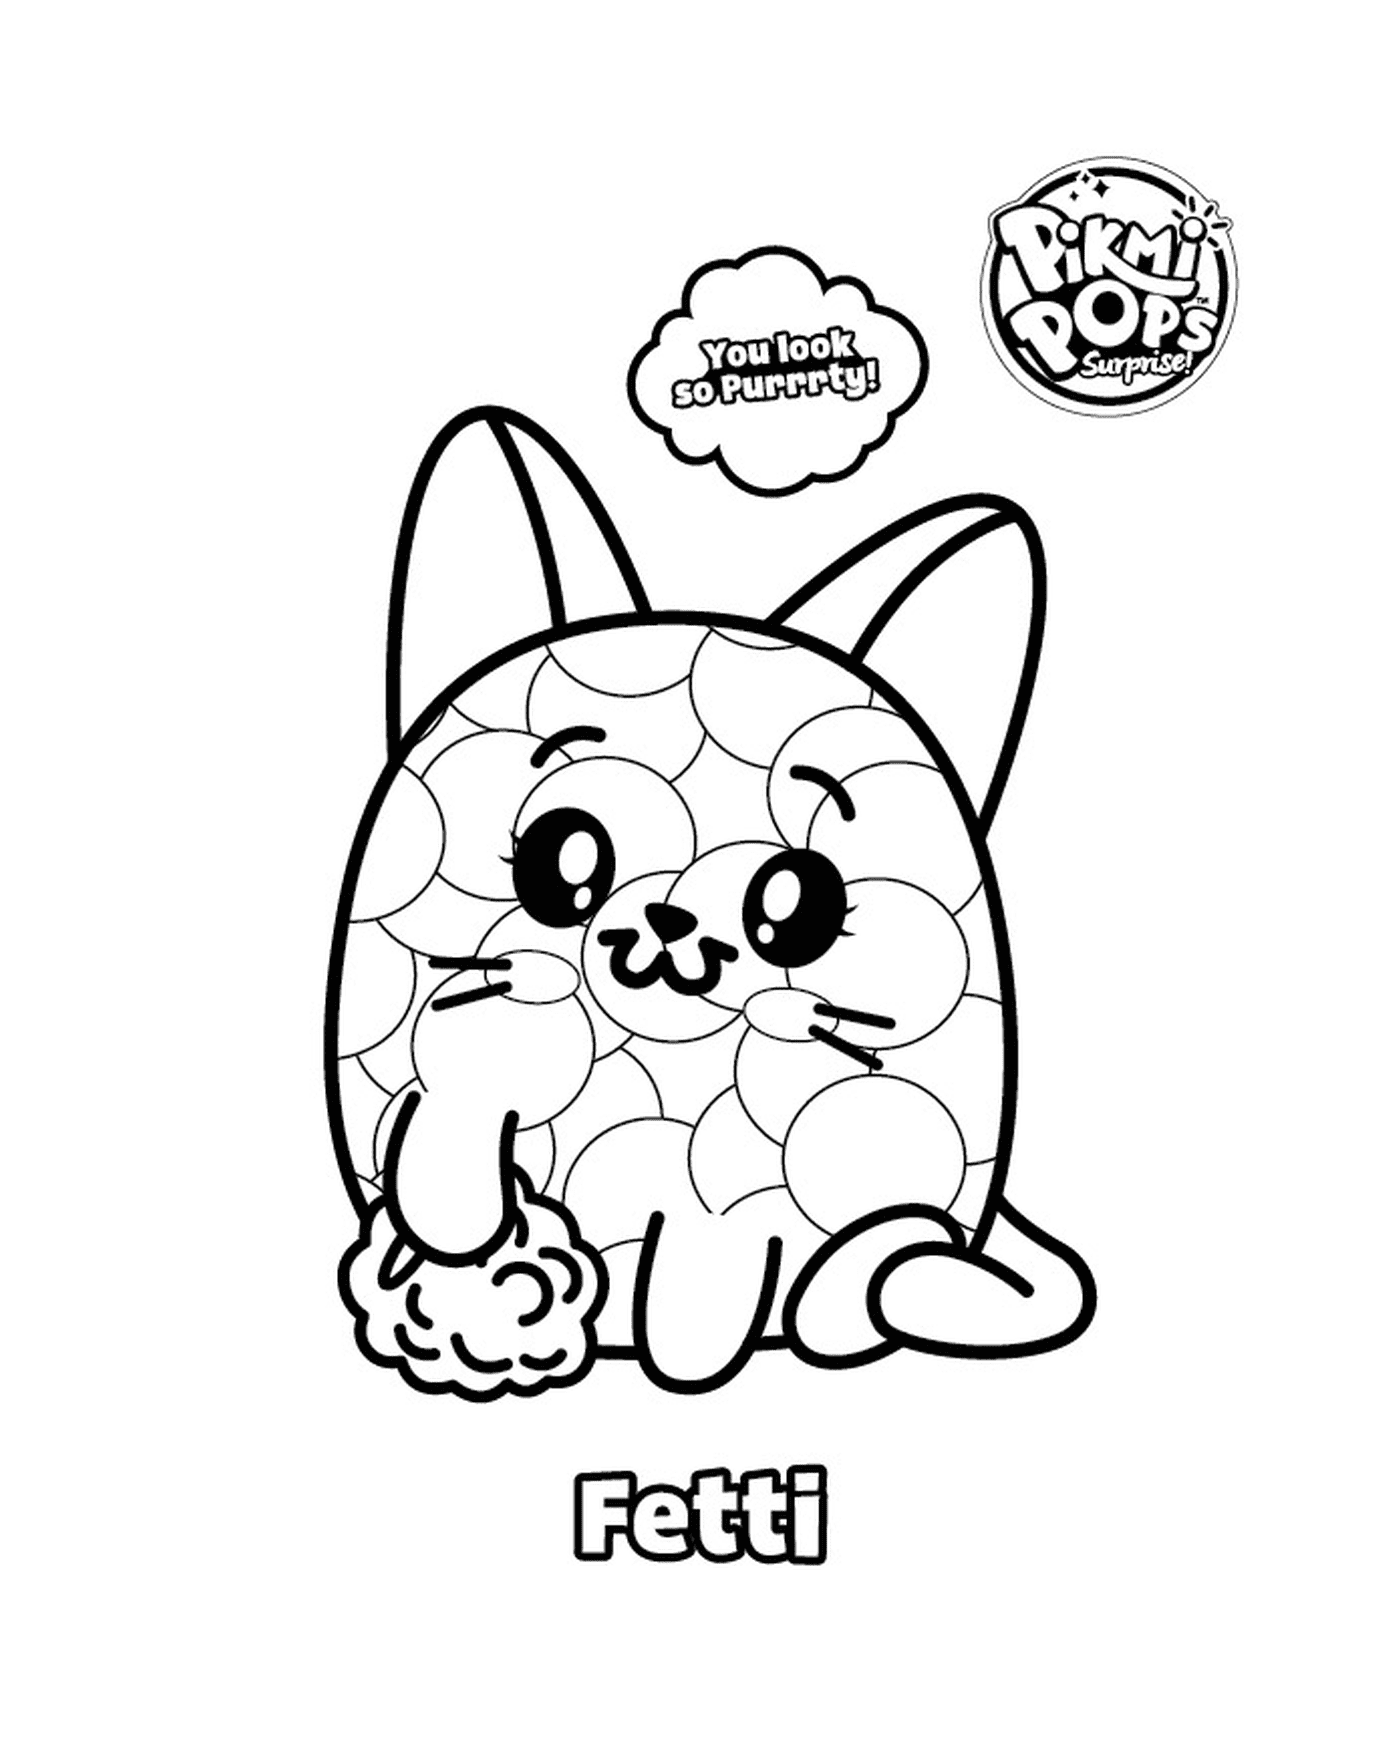  Pikmi Pop with a cat named Fetti 